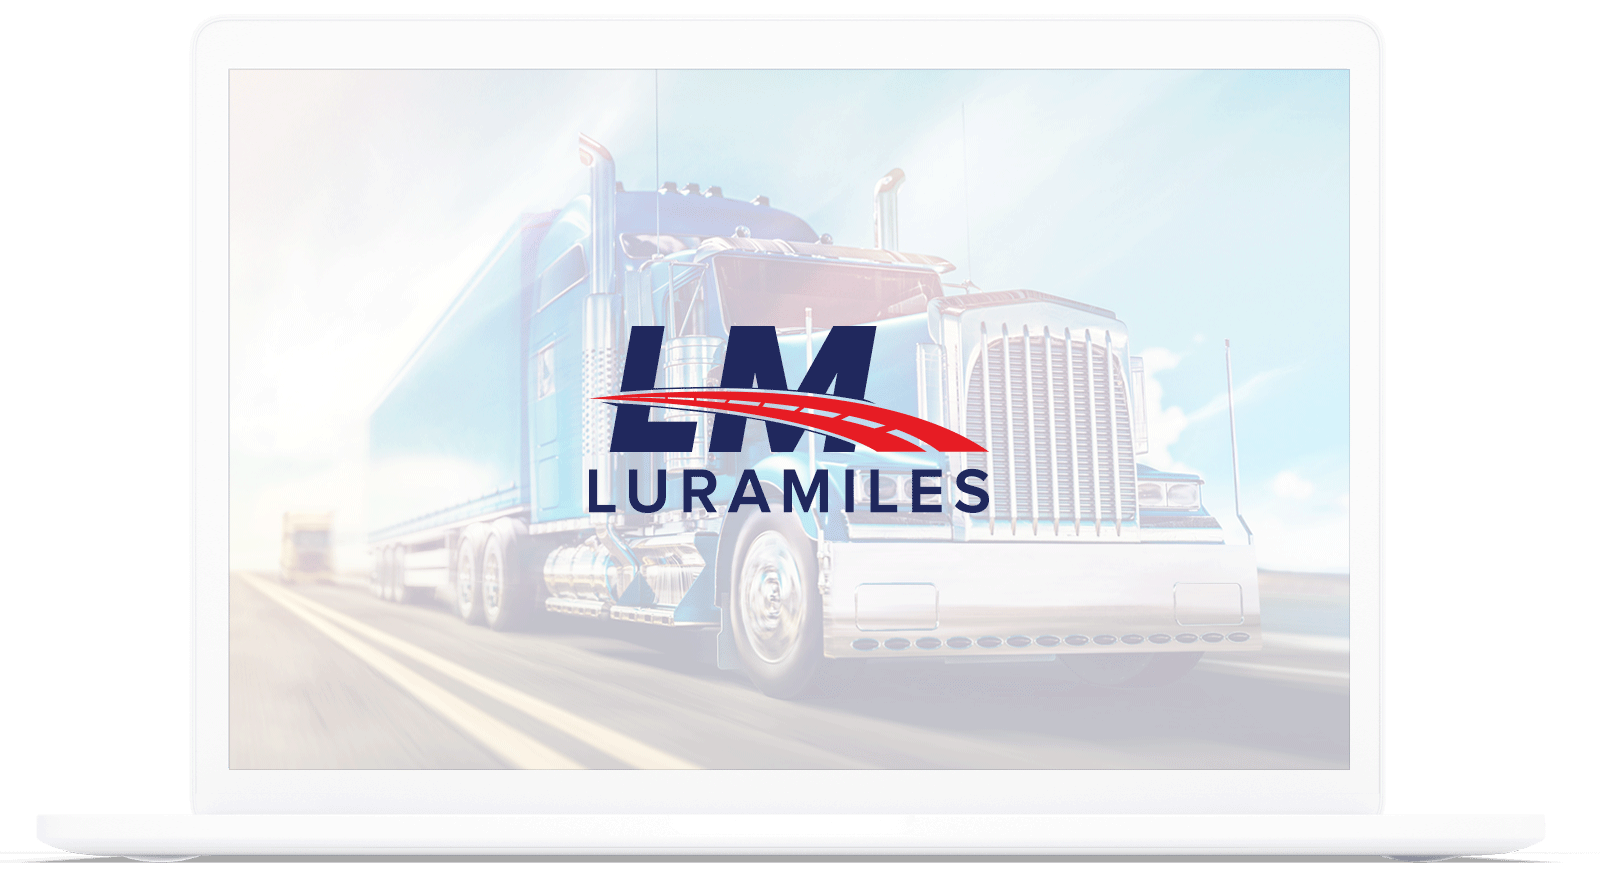 Luramiles logo and freight truck on laptop screen